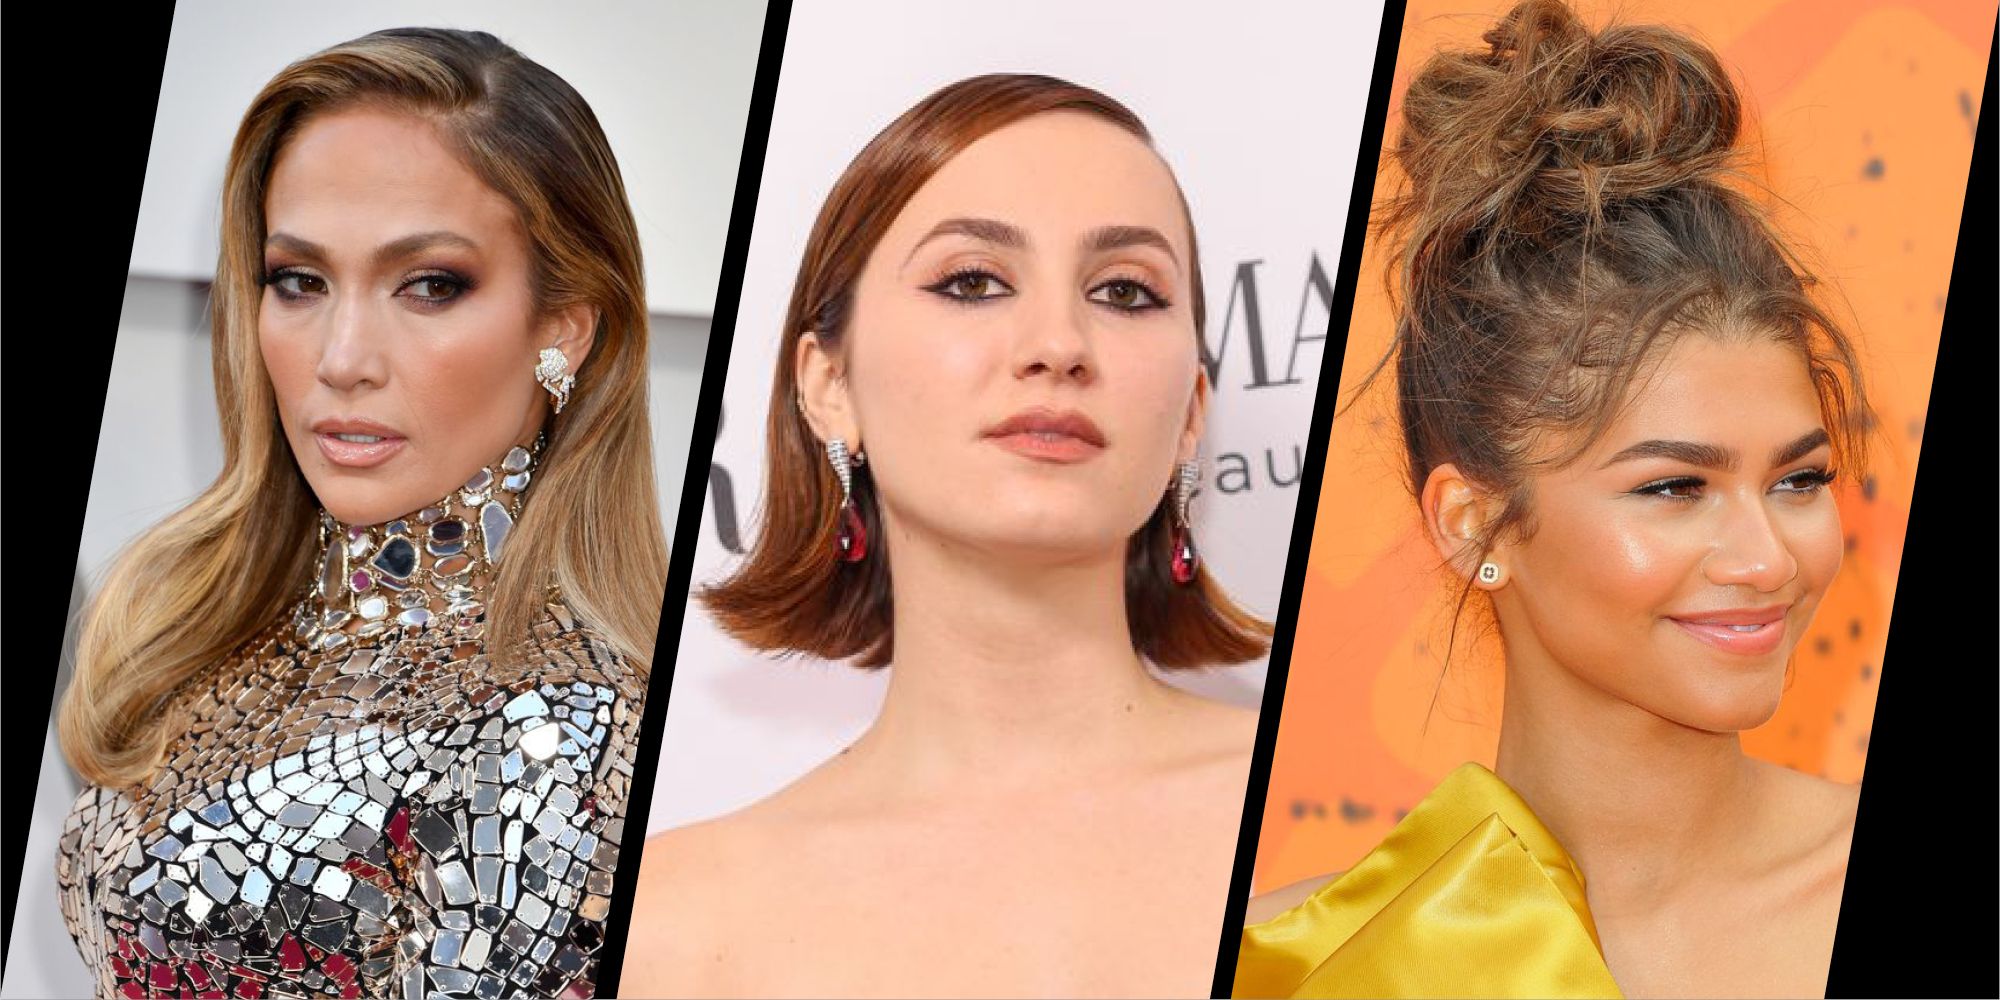 A celebrity stylist's guide to party hairstyle trends